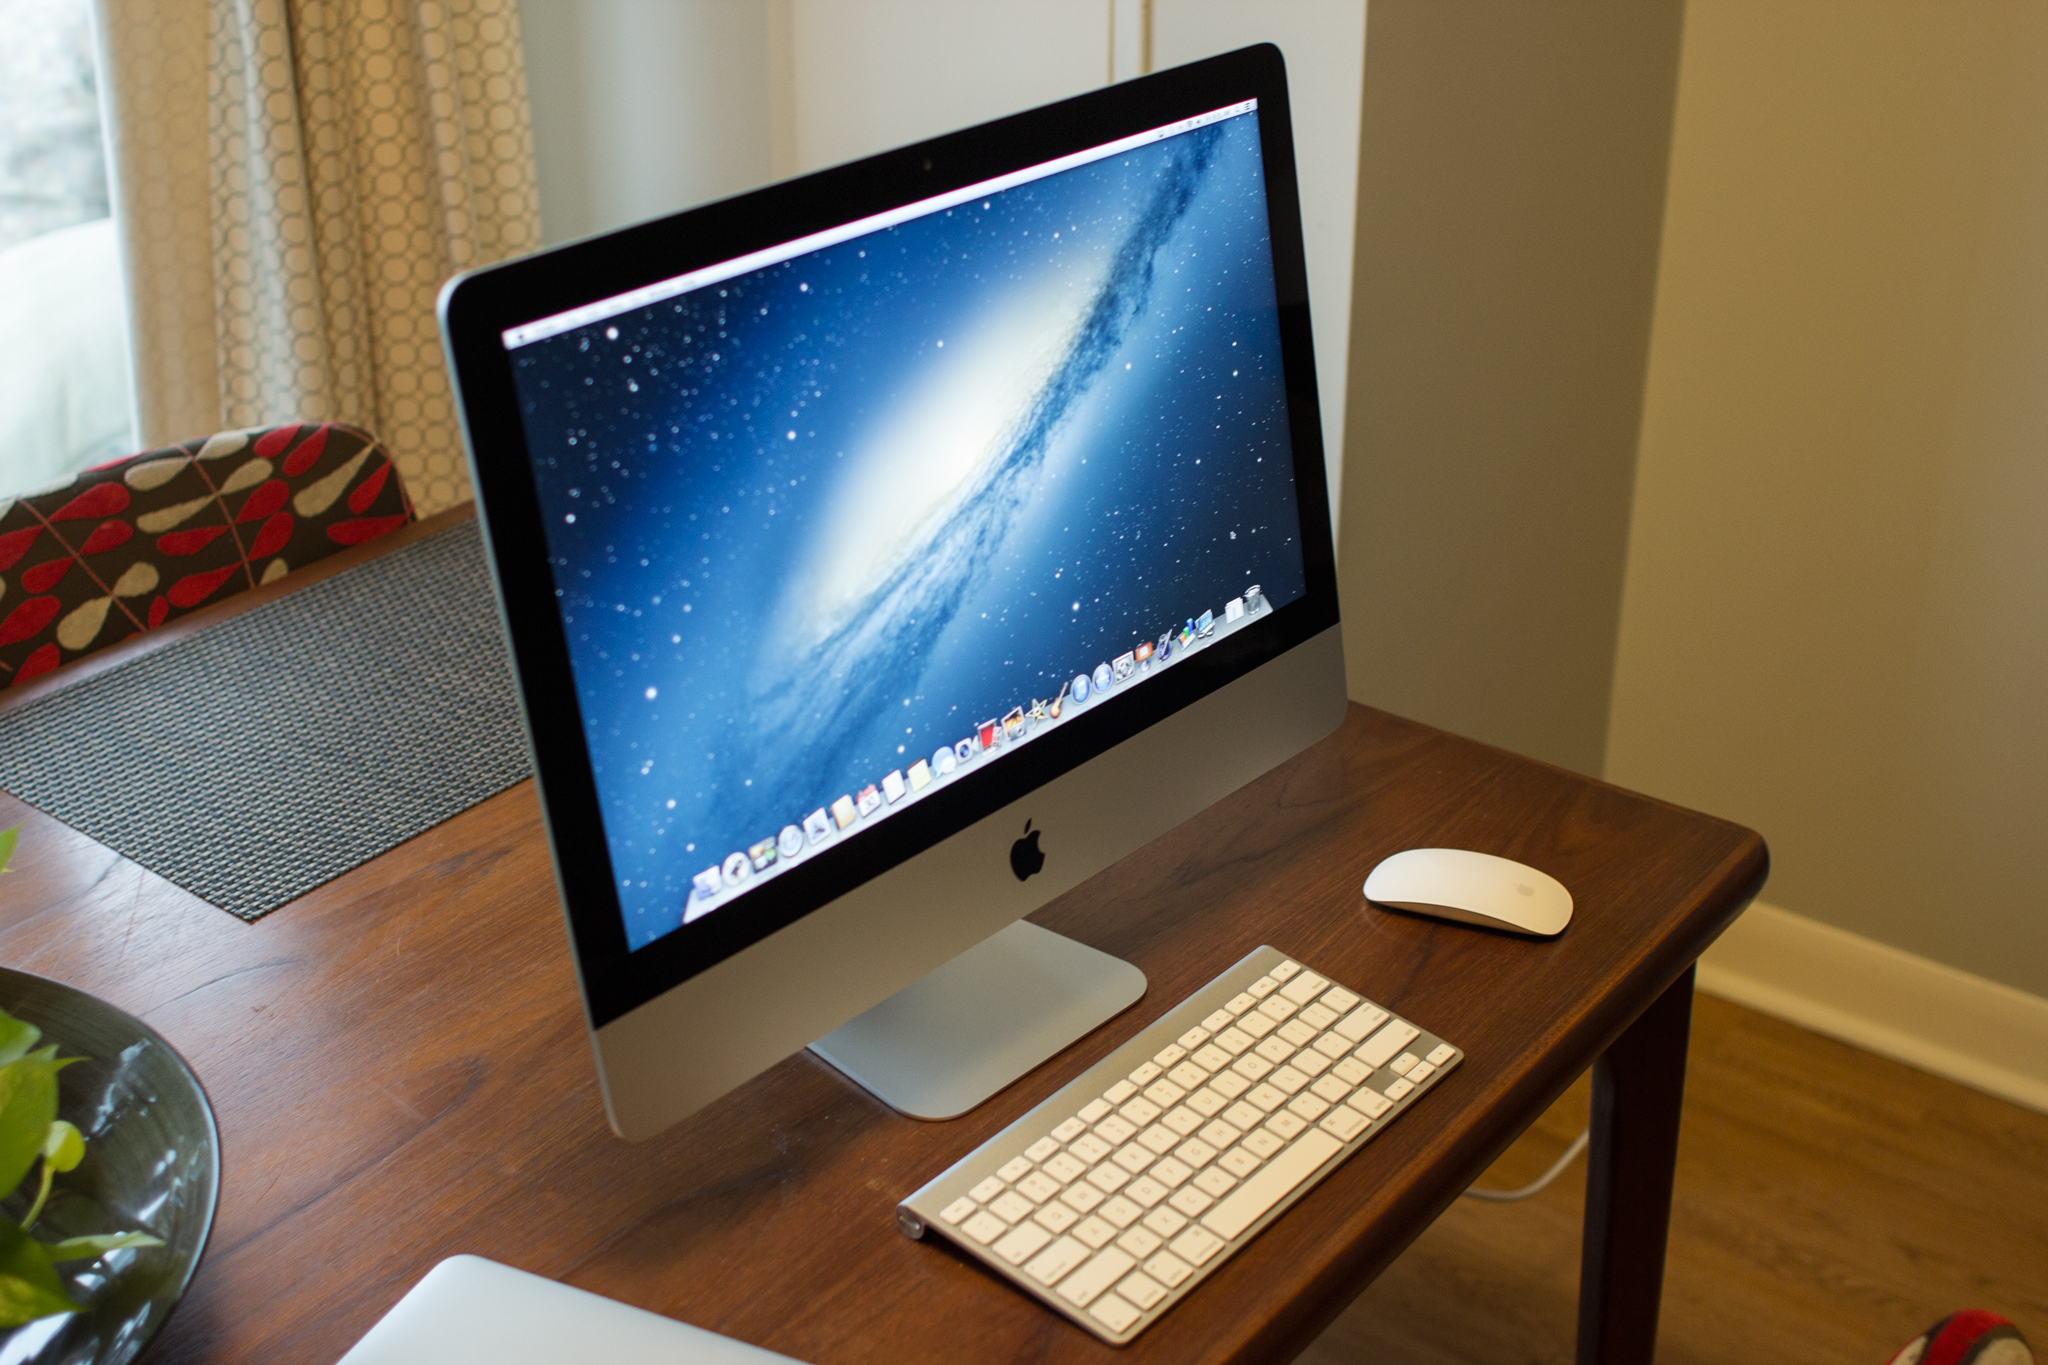 A First Look At The 2012 21.5-inch iMac, And How It Compares To